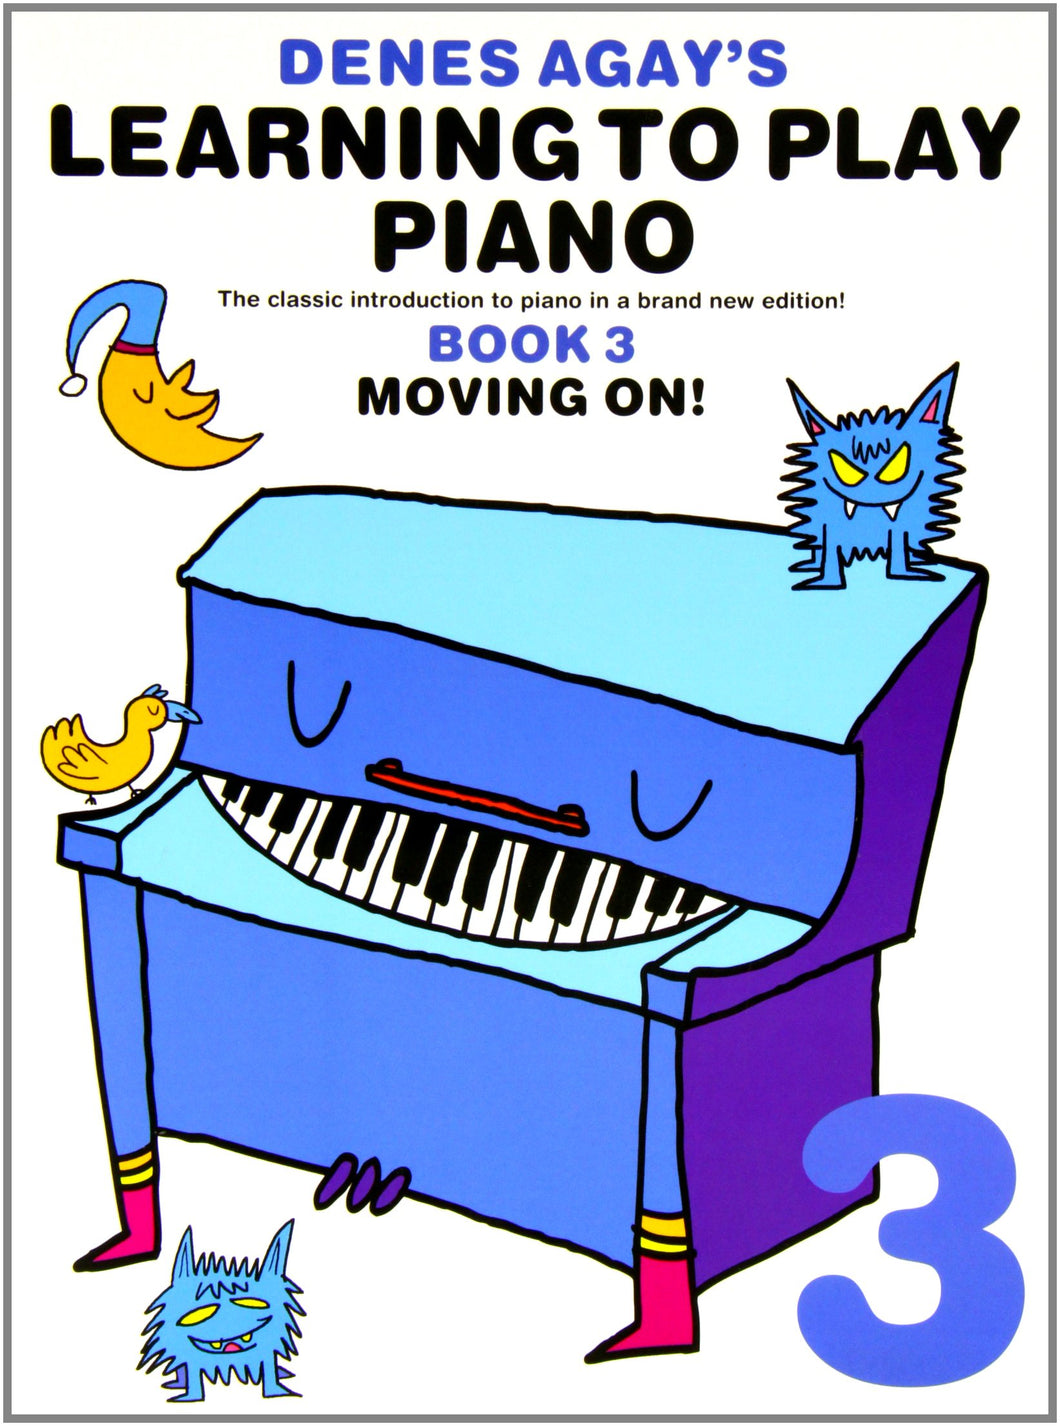 Denes Agay's Learning to Play Piano - Book 3